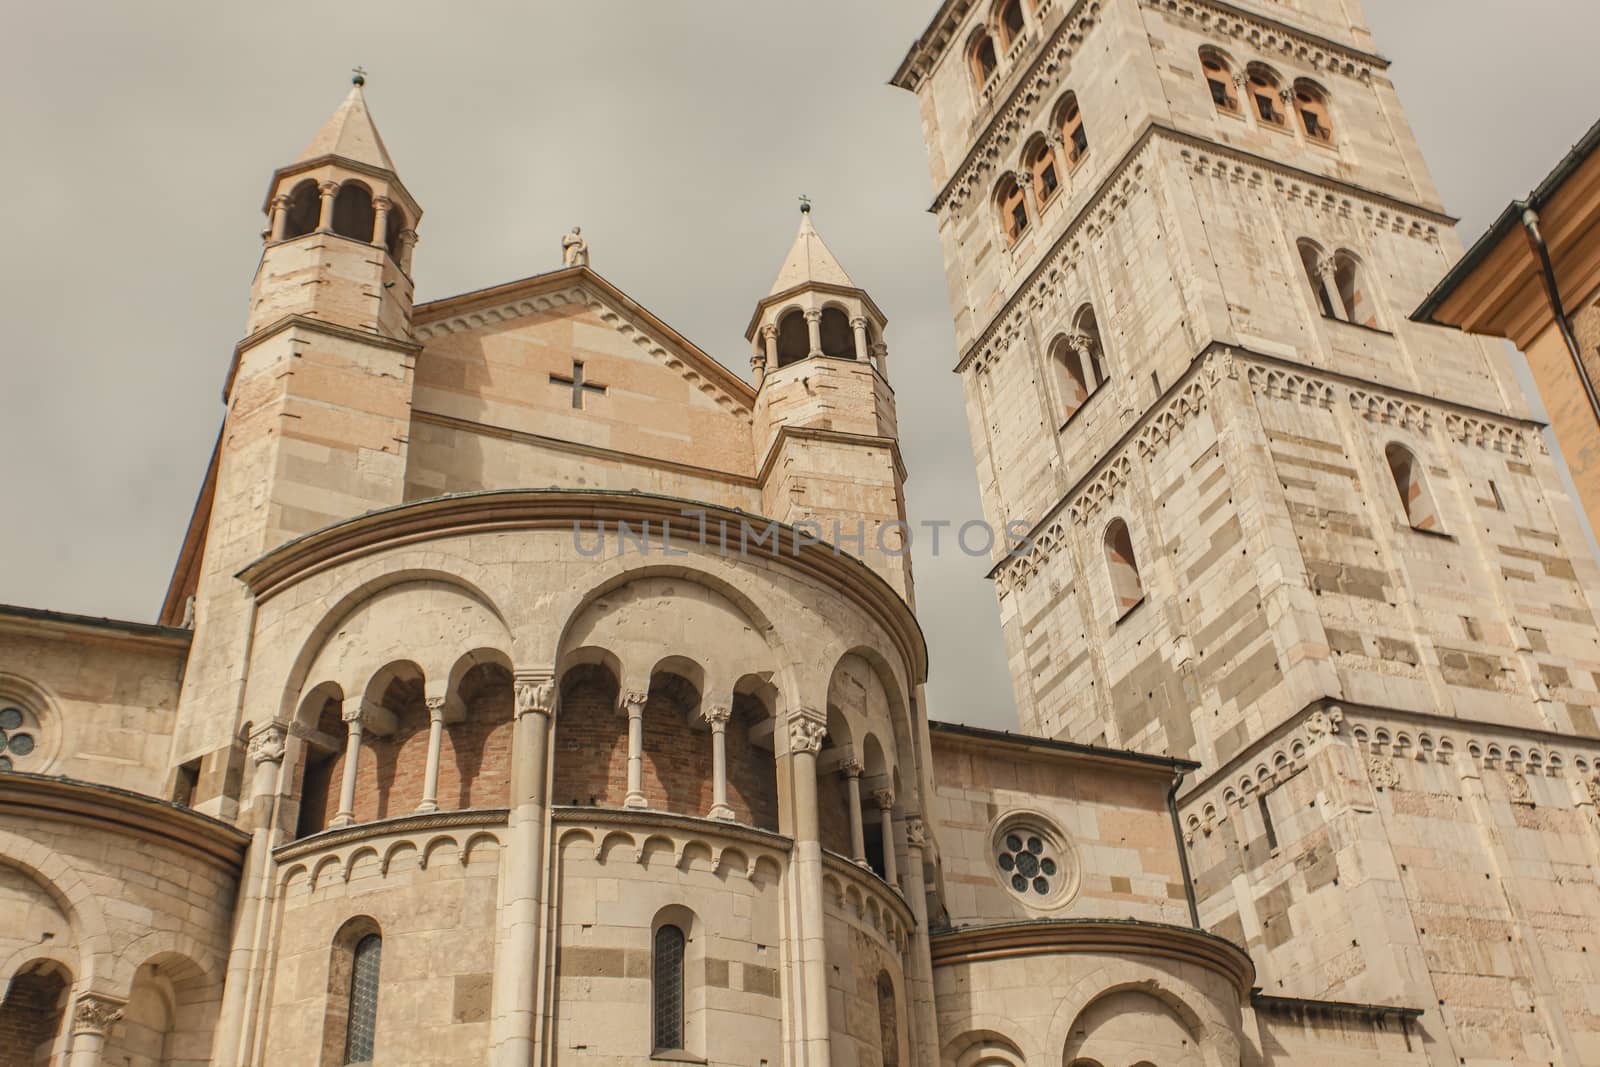 Detail of Modena's Duomo in Italy, the most important church in the city